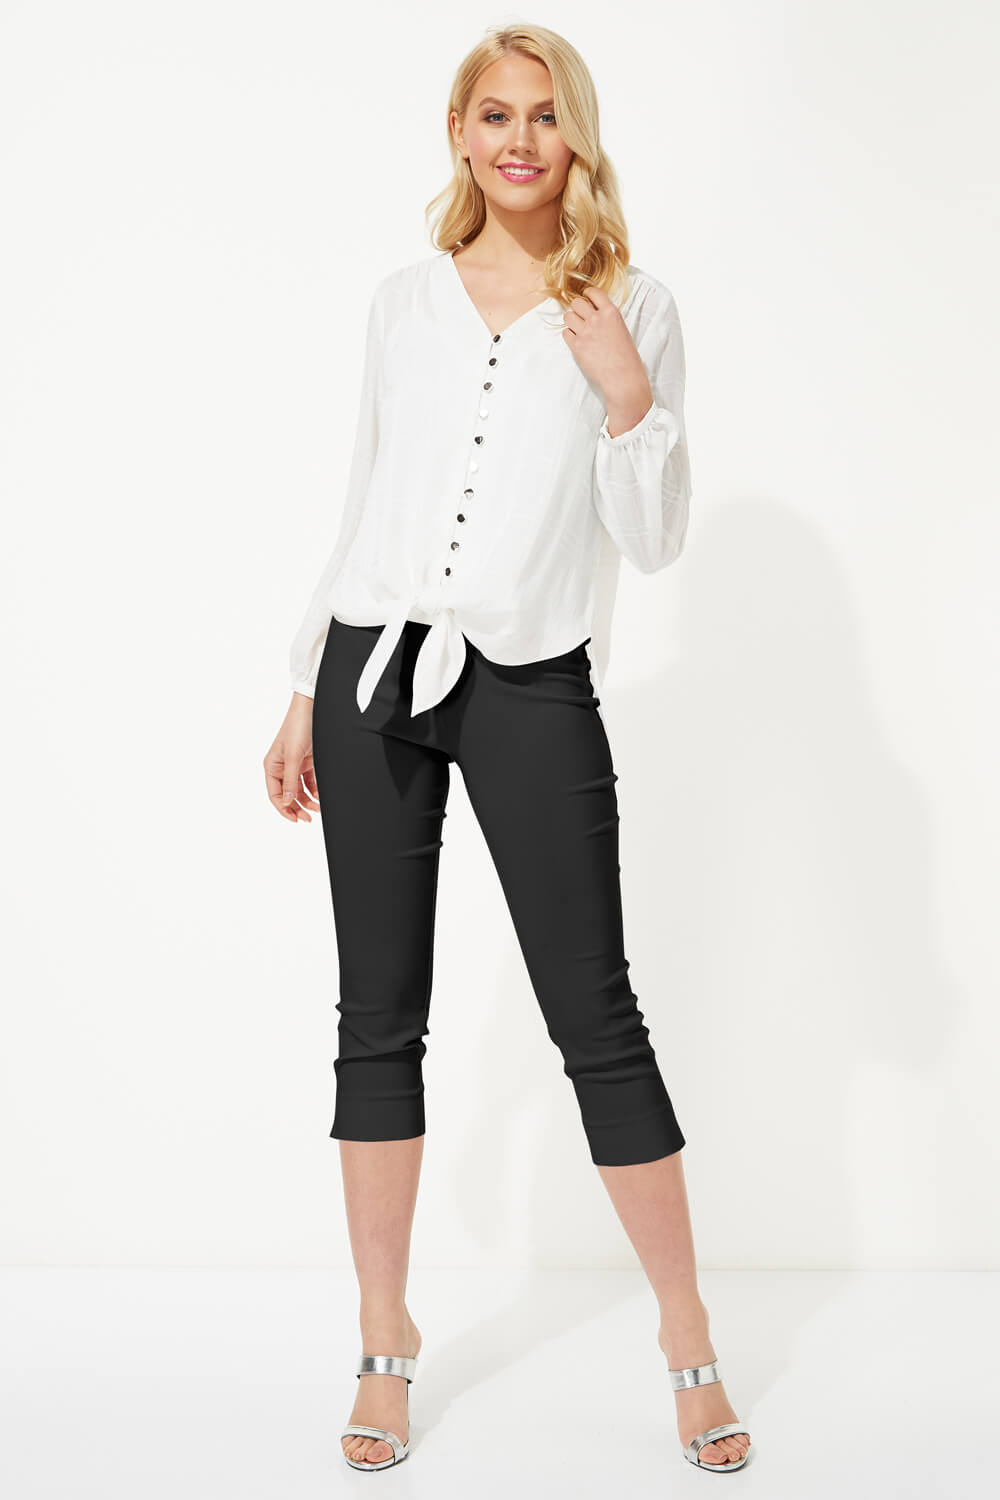 Ivory  Jacquard Geometric Tie Front Blouse, Image 2 of 4